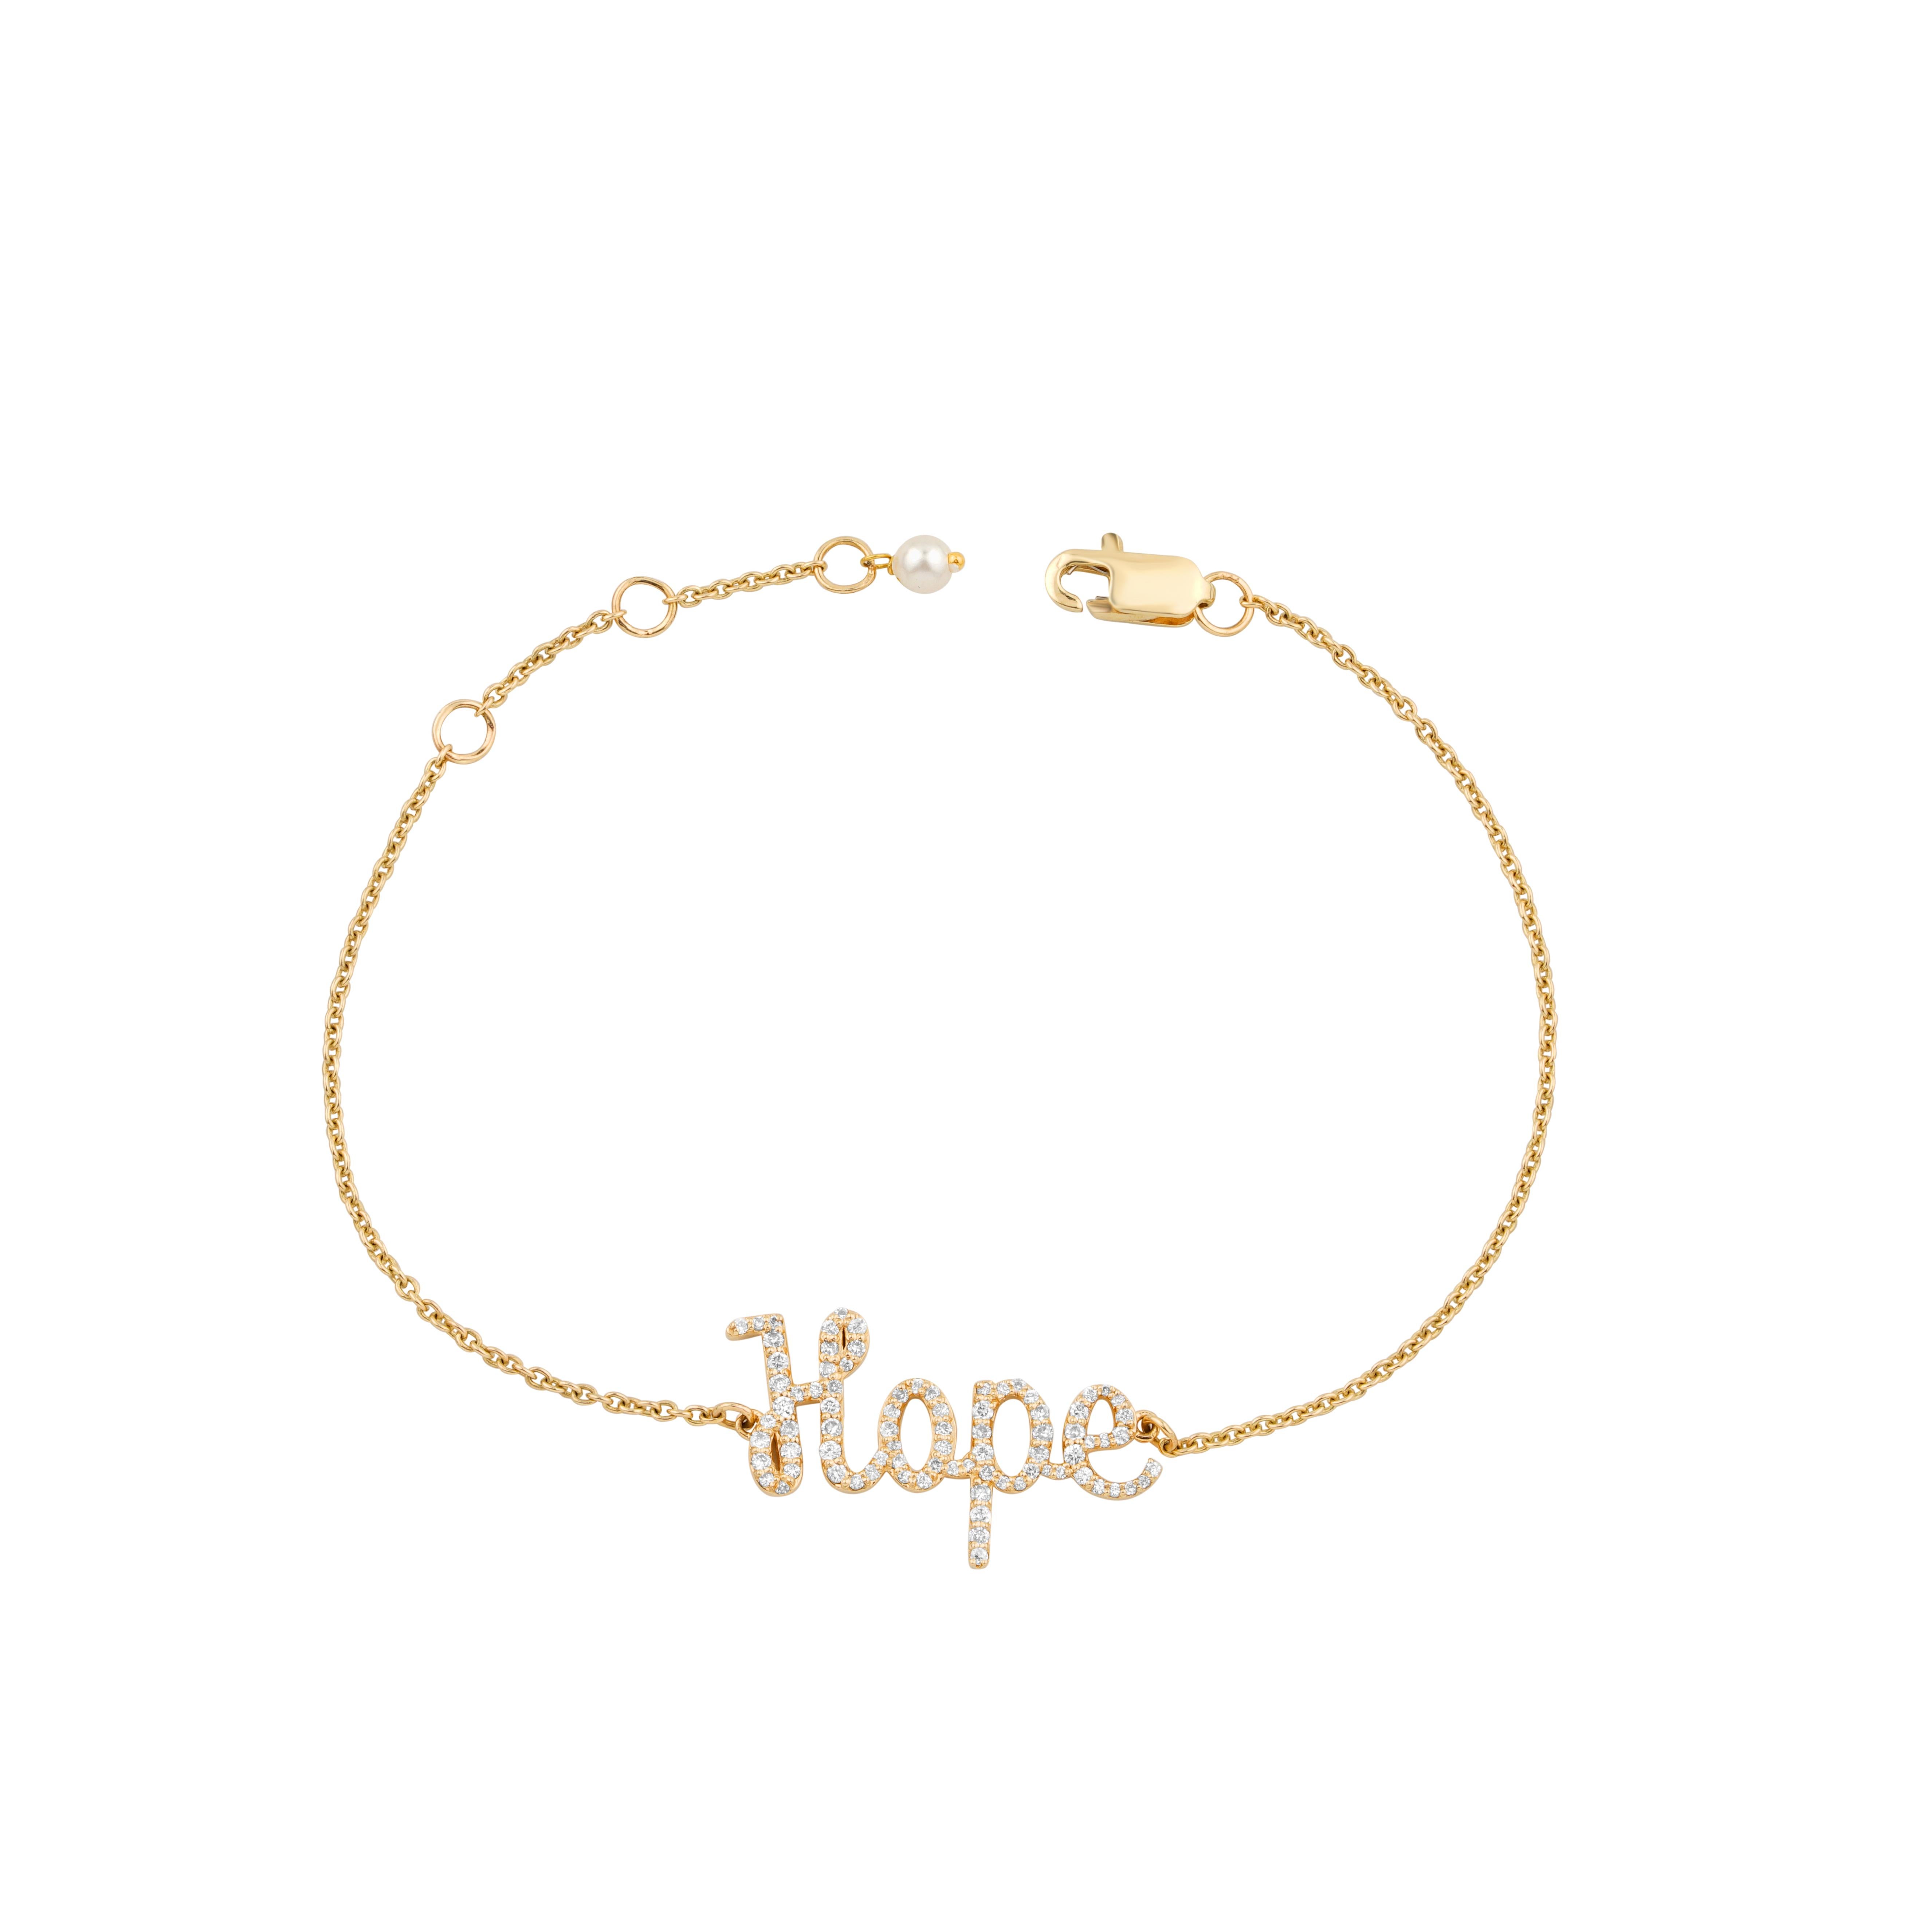 Diamond Hope Charm Bracelet is a delicate bracelet with the word 